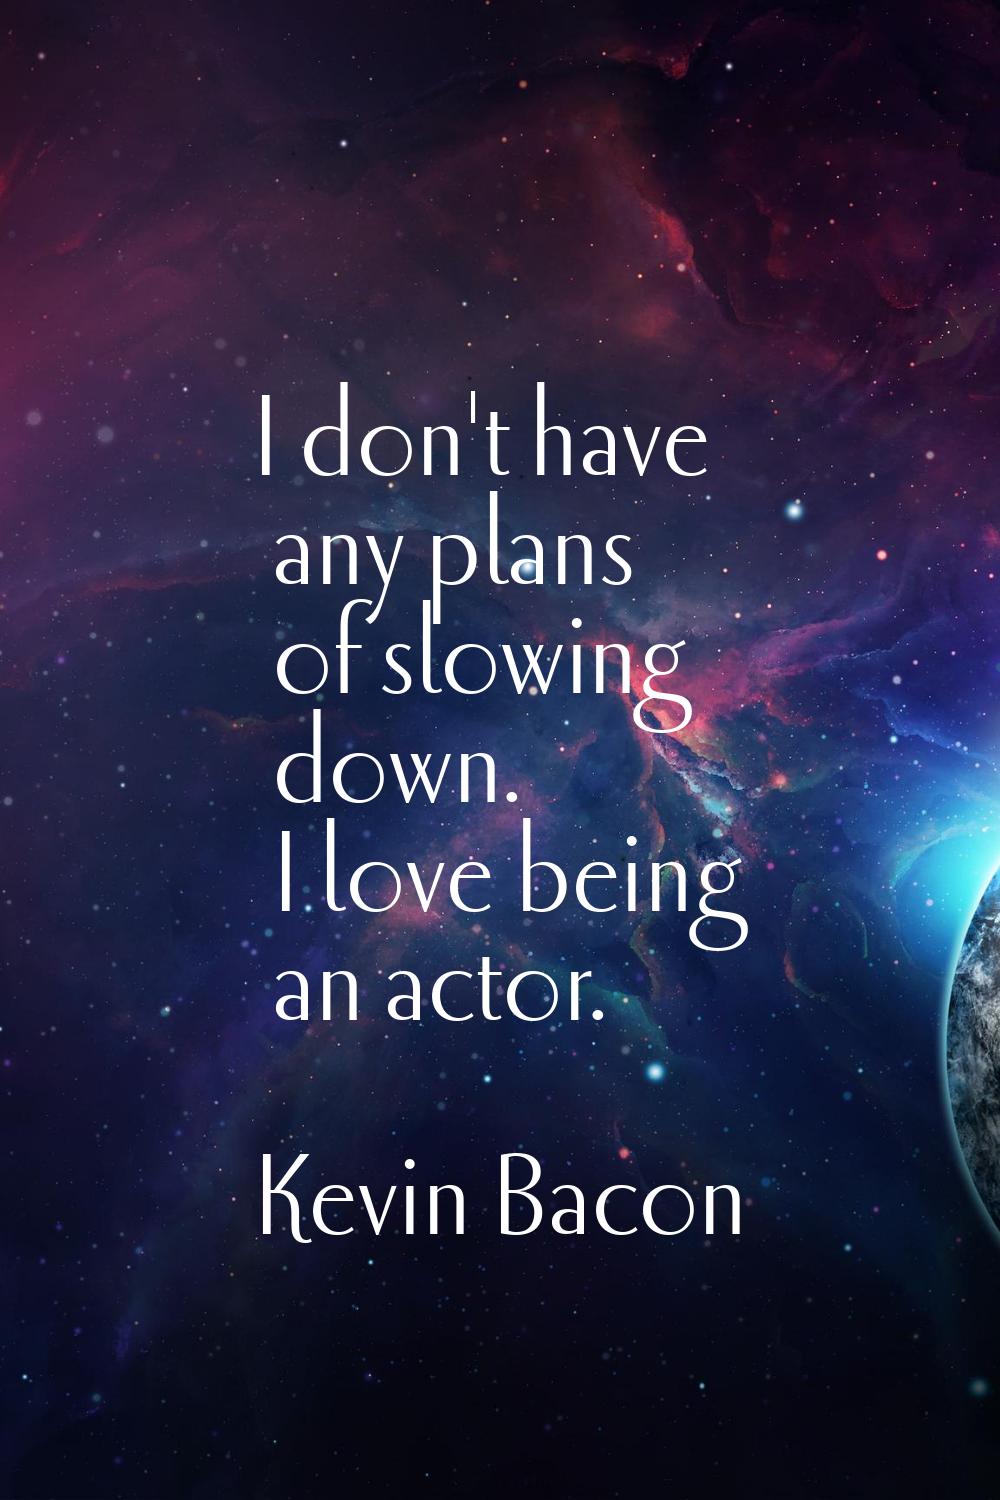 I don't have any plans of slowing down. I love being an actor.